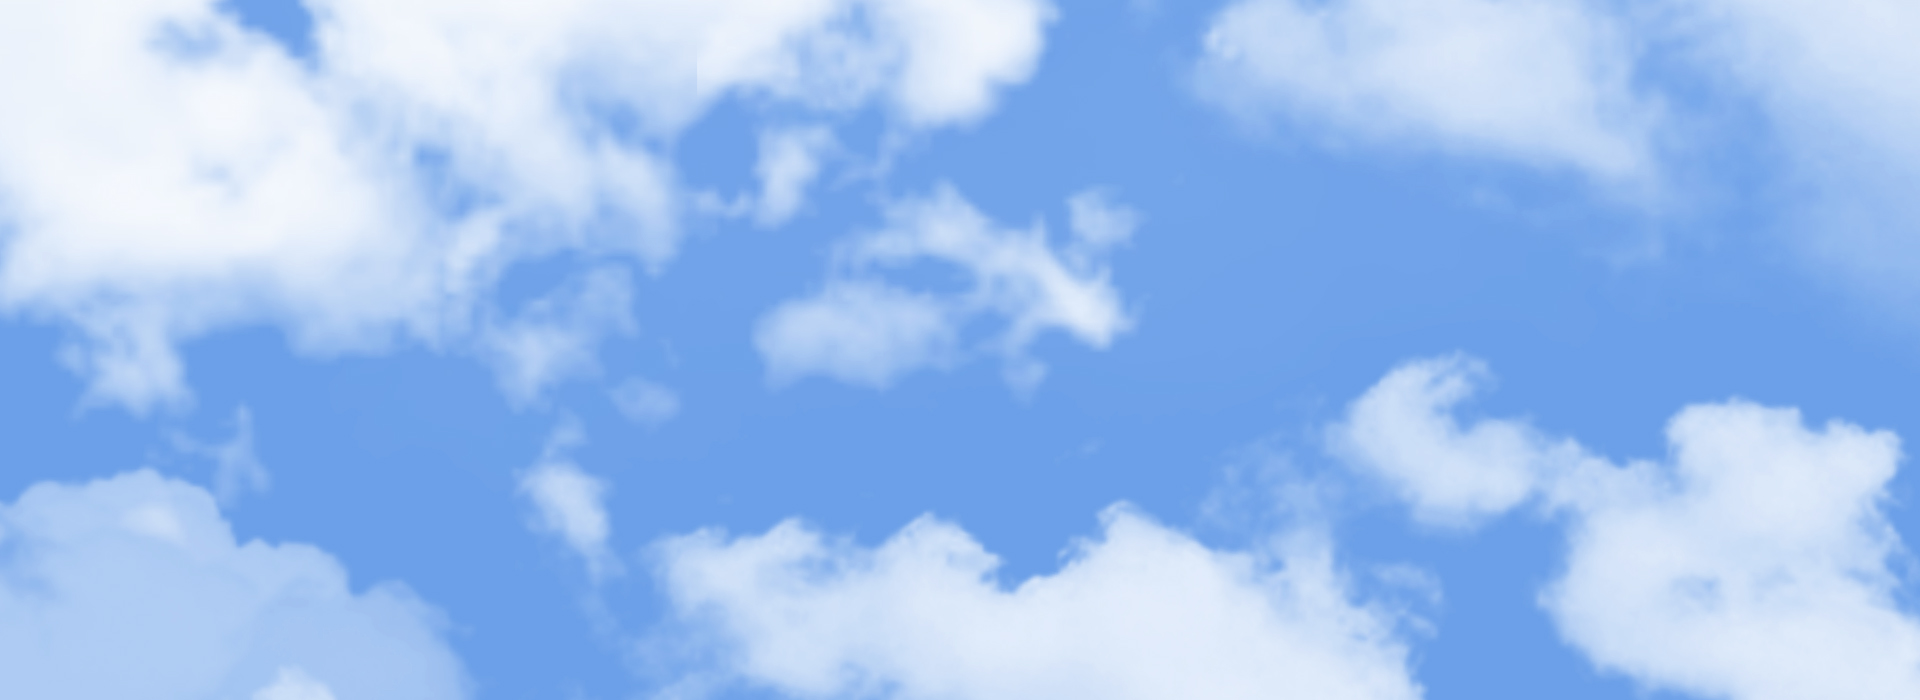 Cloud Background HD - FREE Vector Design - Cdr, Ai, EPS, PNG, SVG